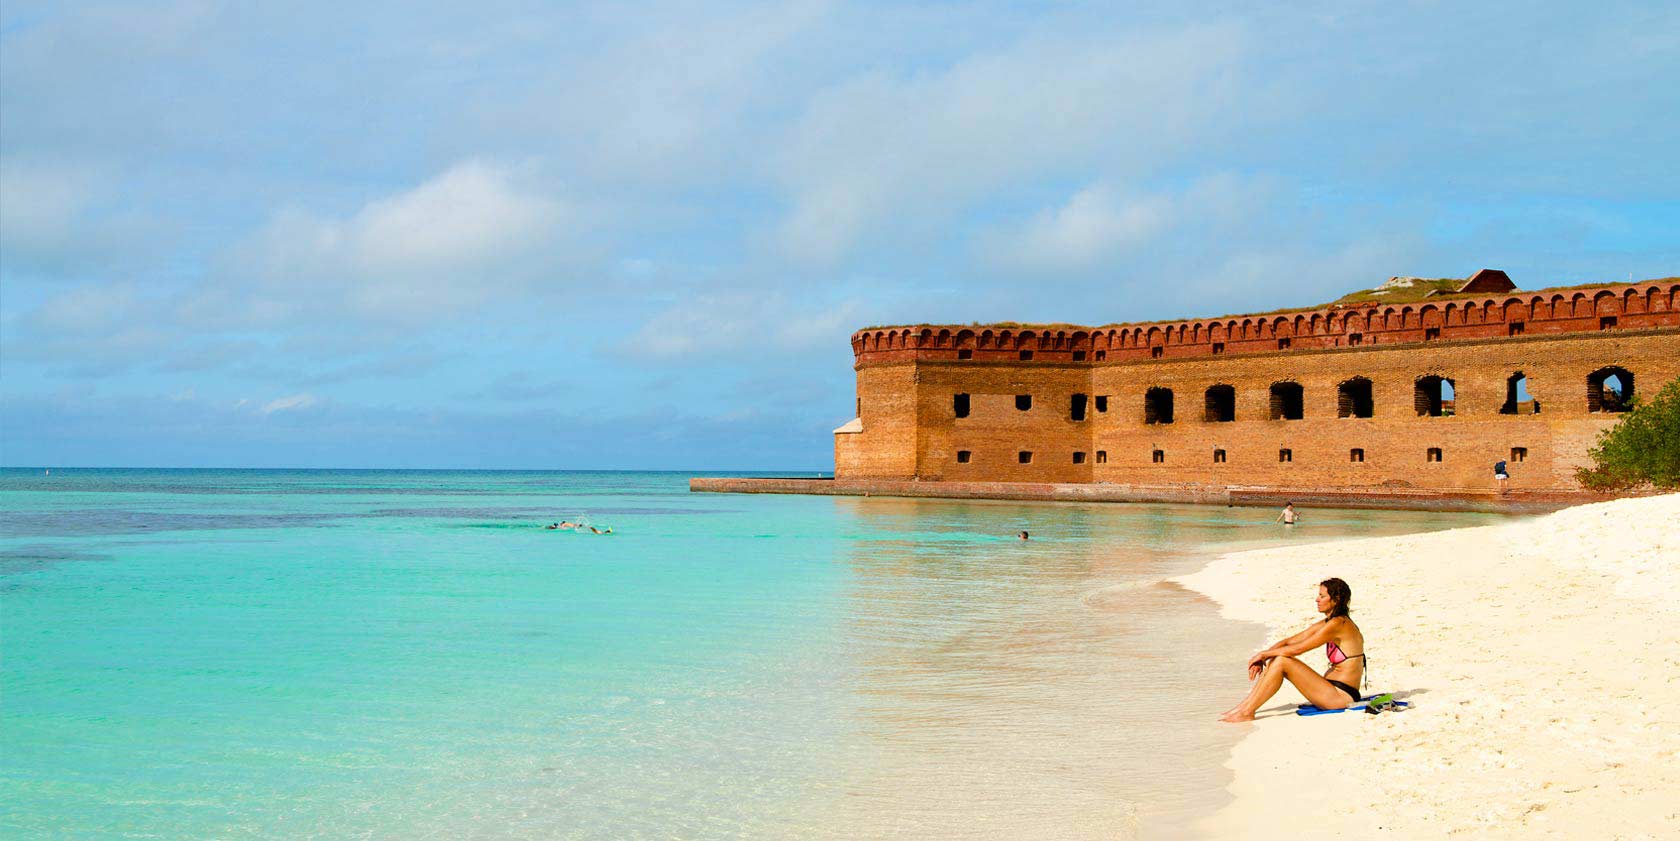 Beach at Dry Tortugas National Park